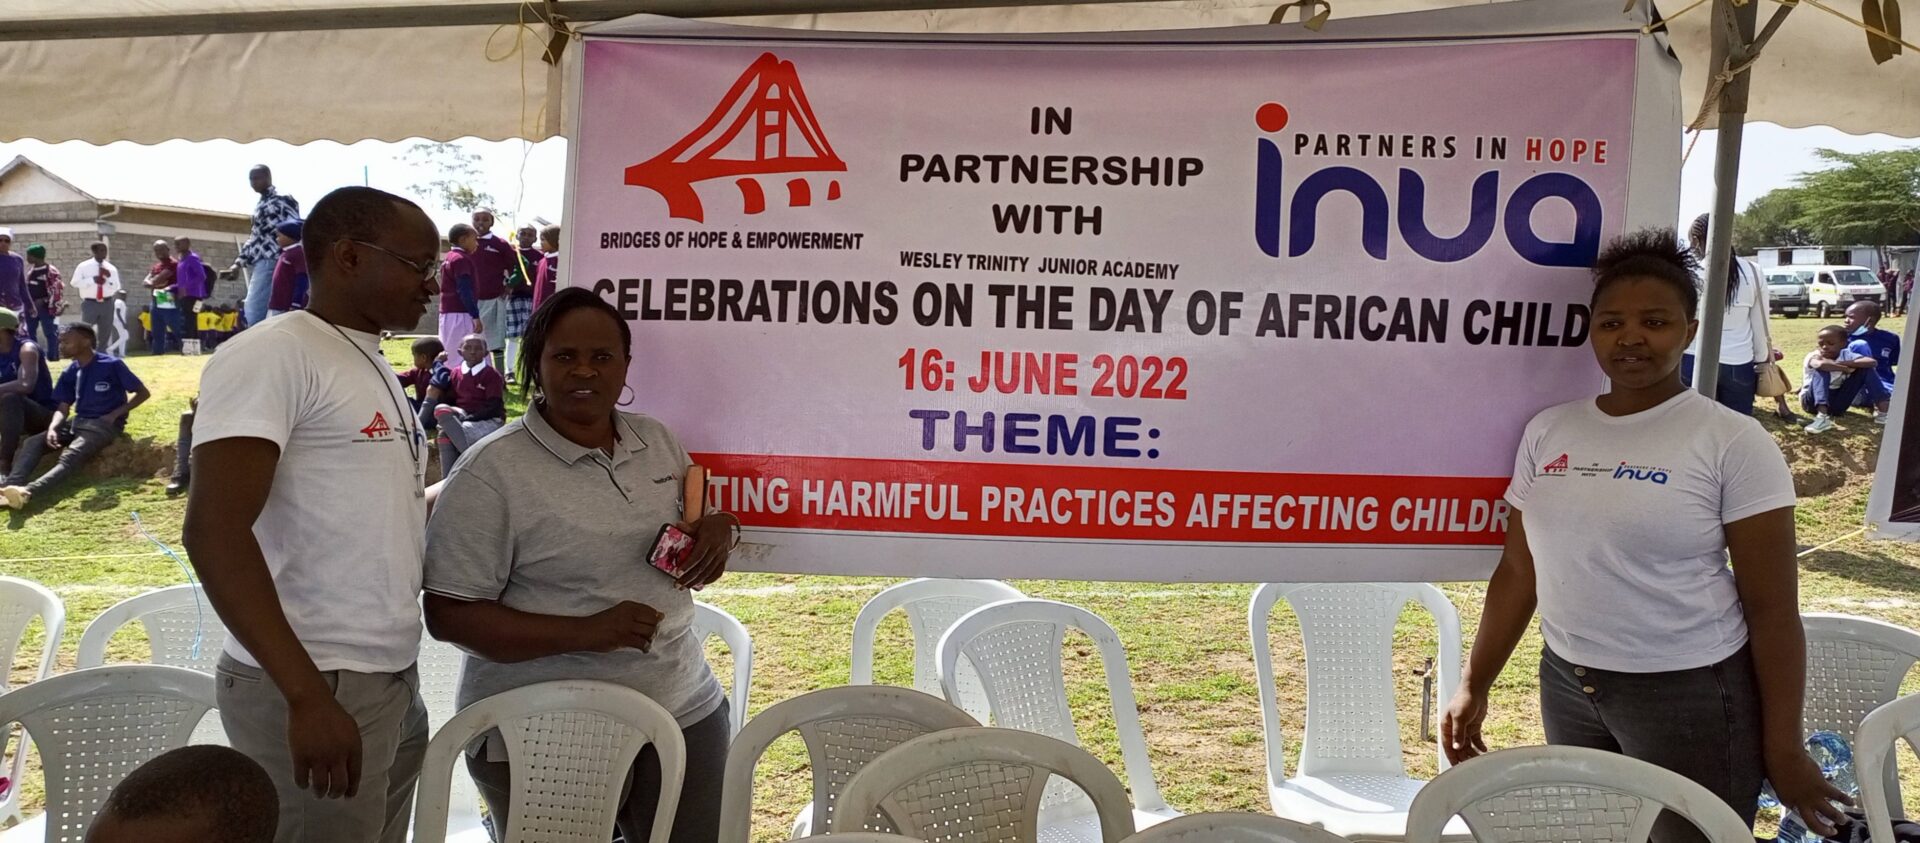 A woman sitting in front of a banner.